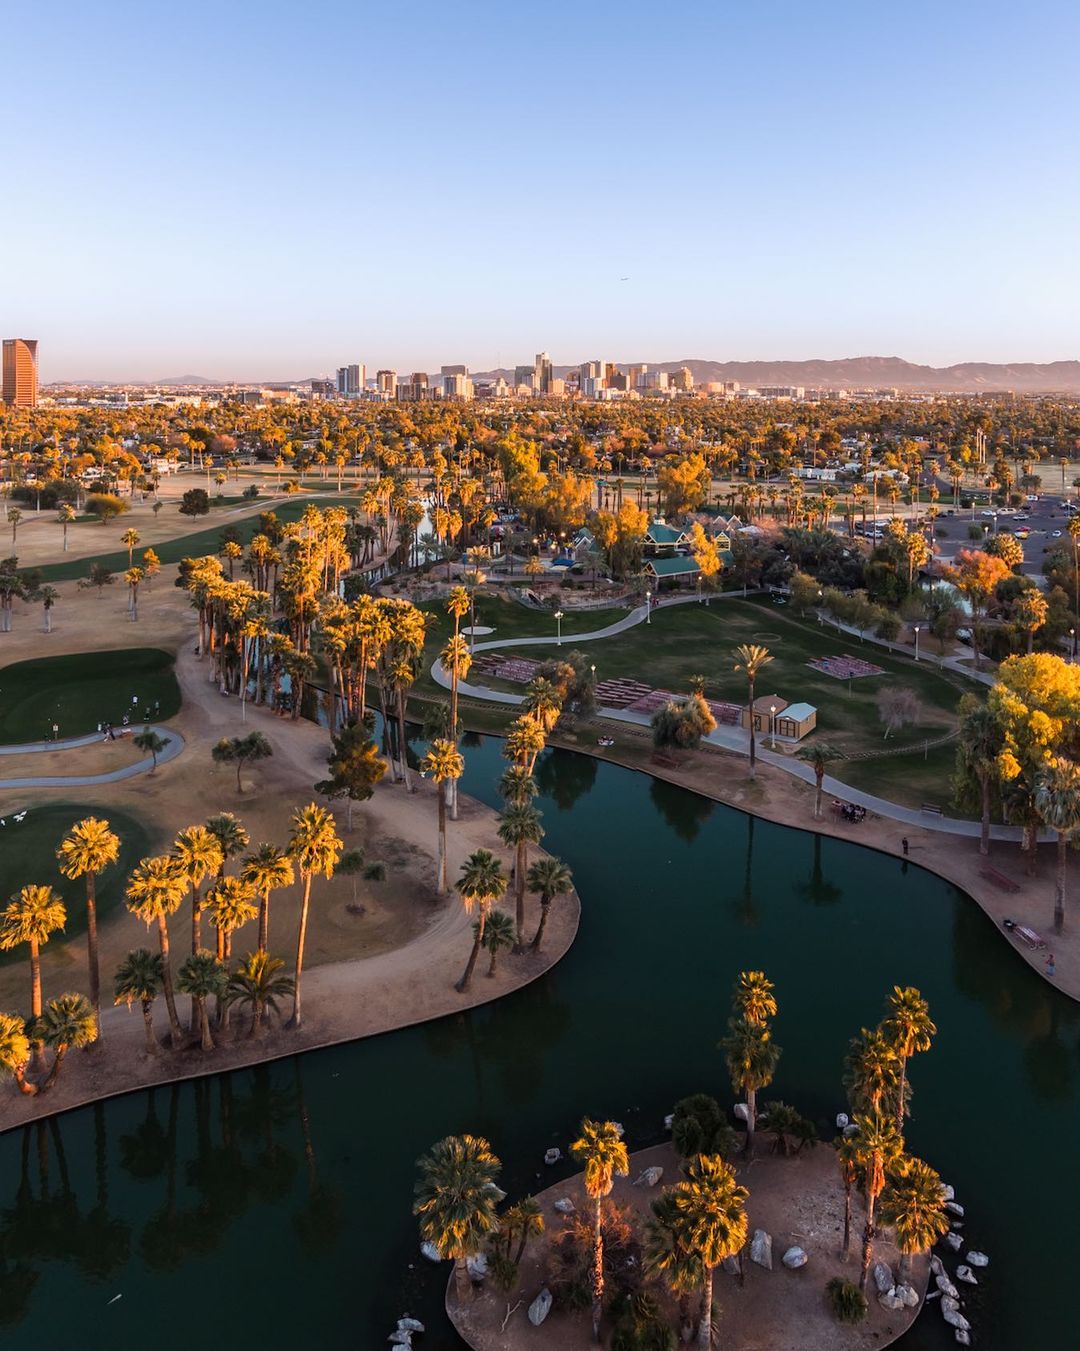 Overview of the Phoenix metro with warm lighting. Photo by Instagram user @droningjudah.